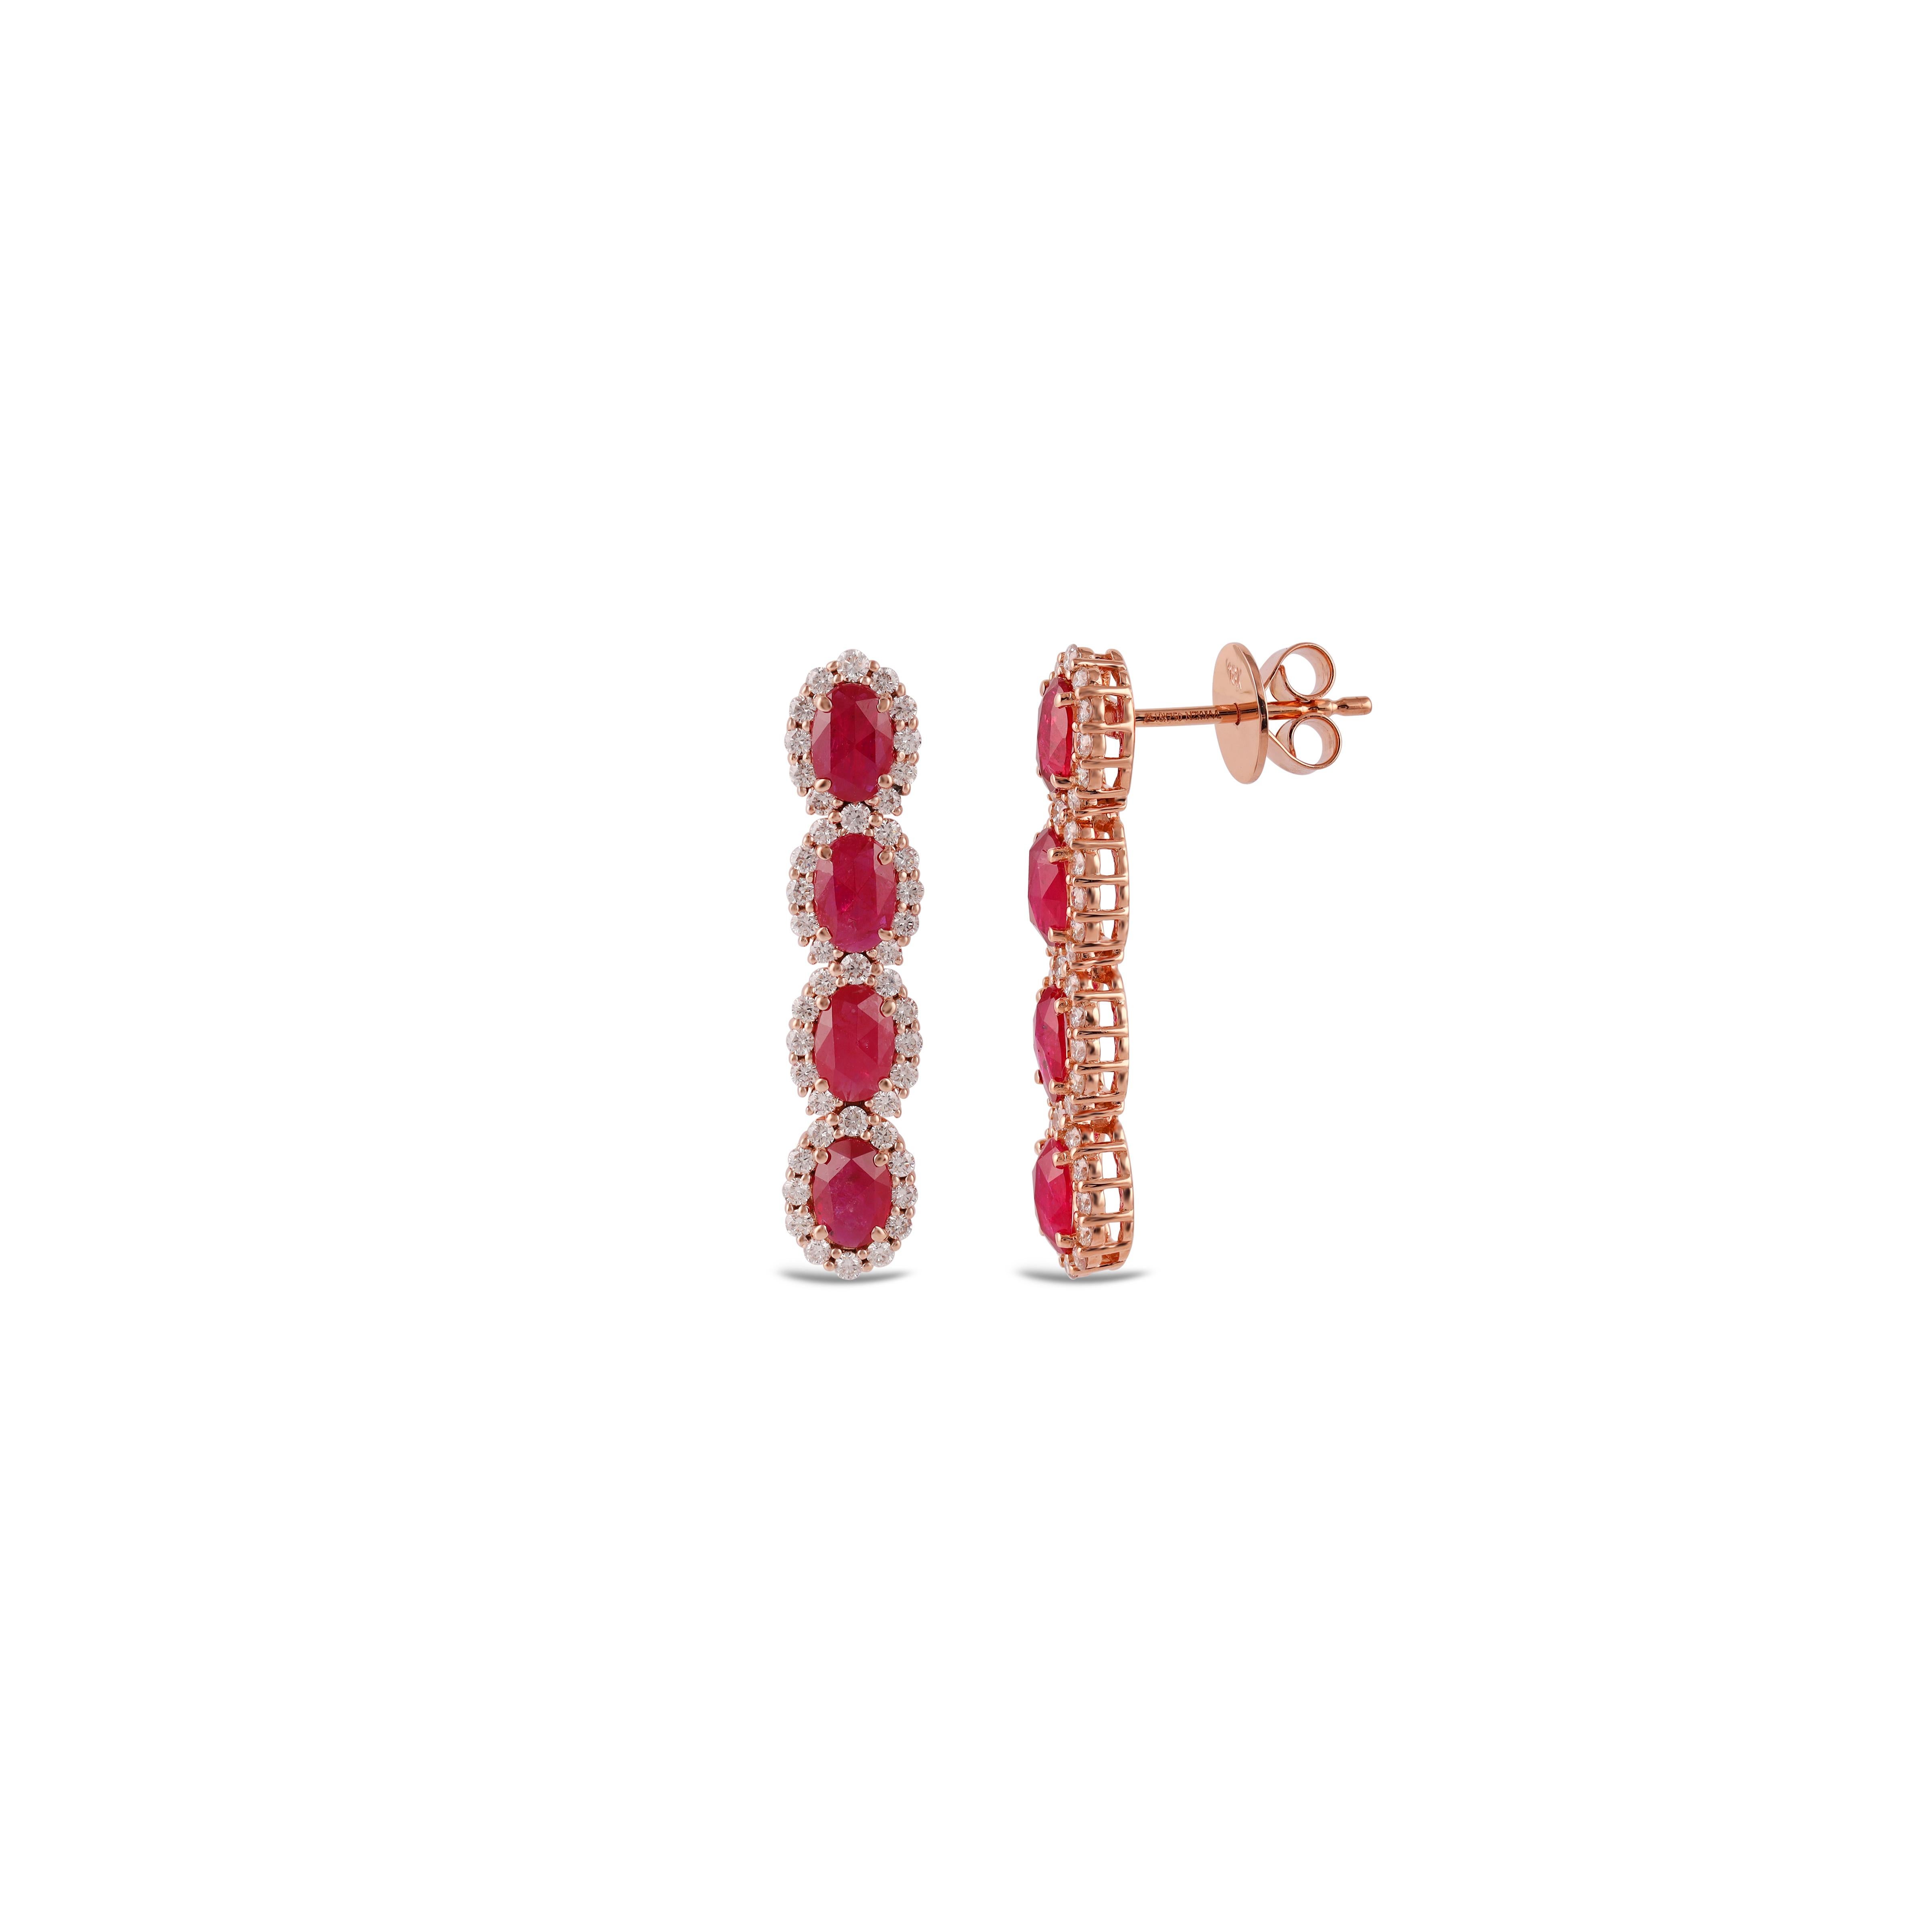 Contemporary Mozambique Ruby and Diamond Earrings Studded in 18 Karat Rose Gold For Sale